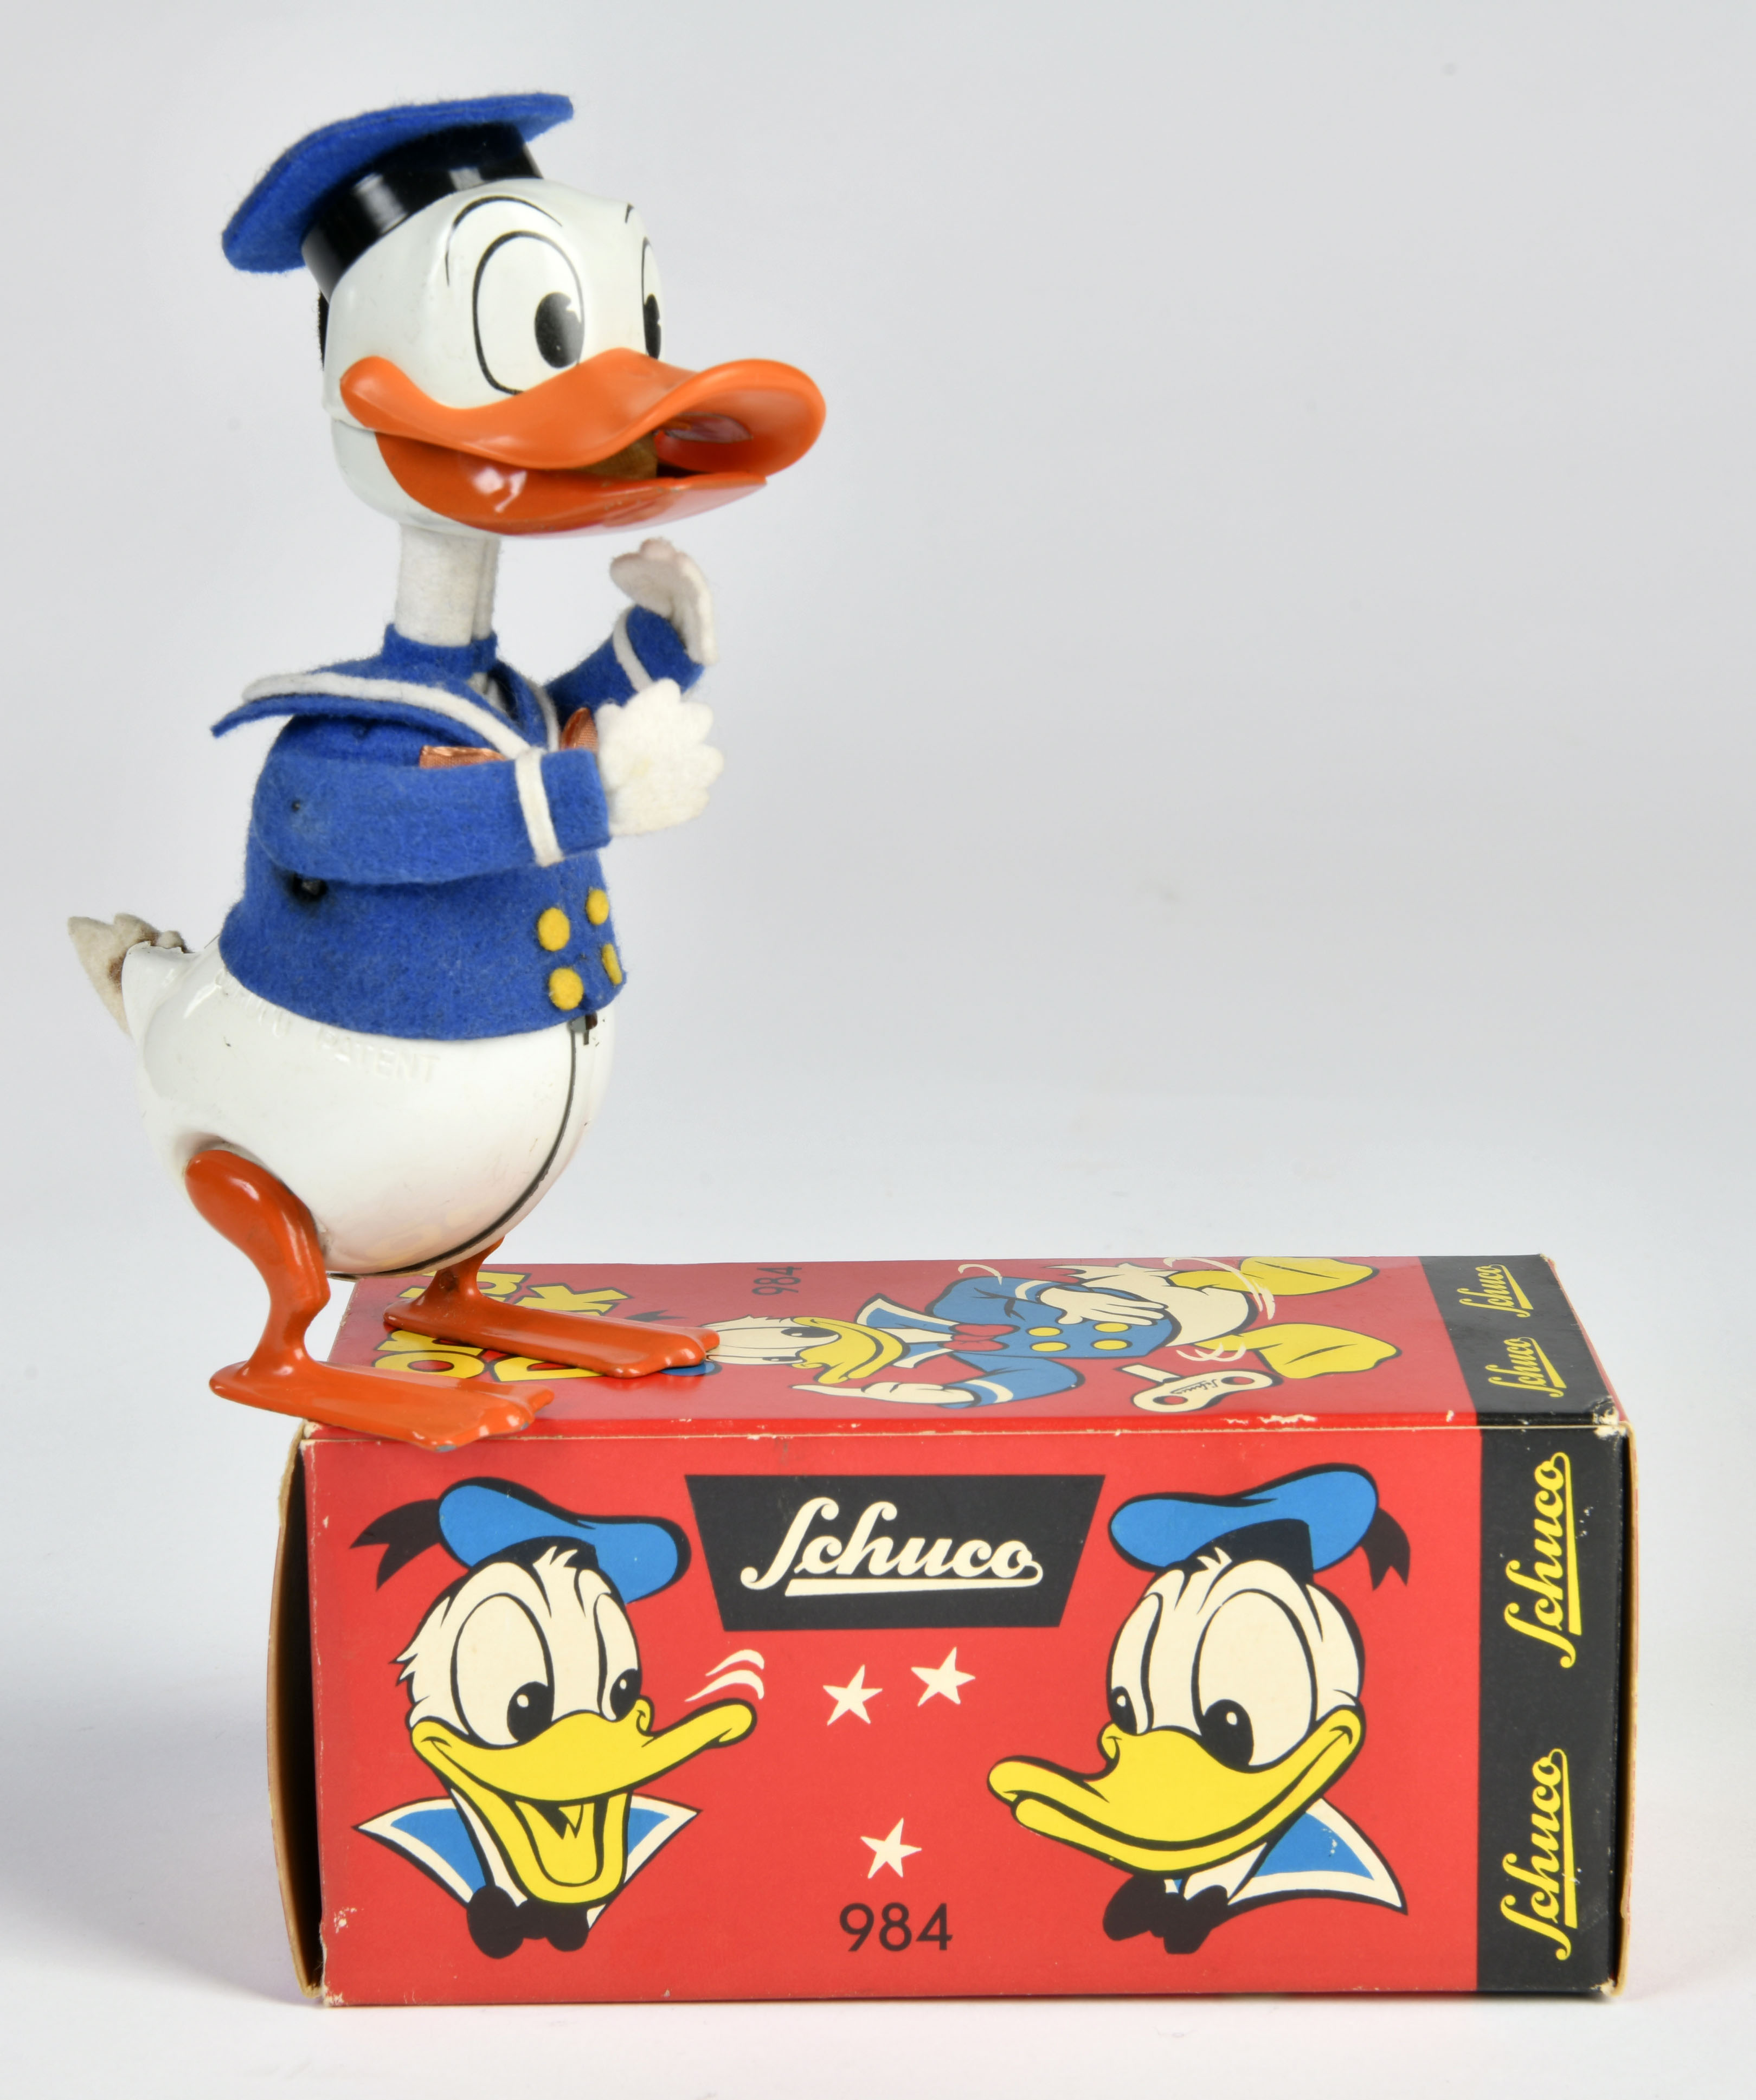 Schuco, Donald Duck 984, W.-Germany, 15,5 cm, mixed constr., cw ok, with voice, box C 1, C 1- - Image 2 of 2